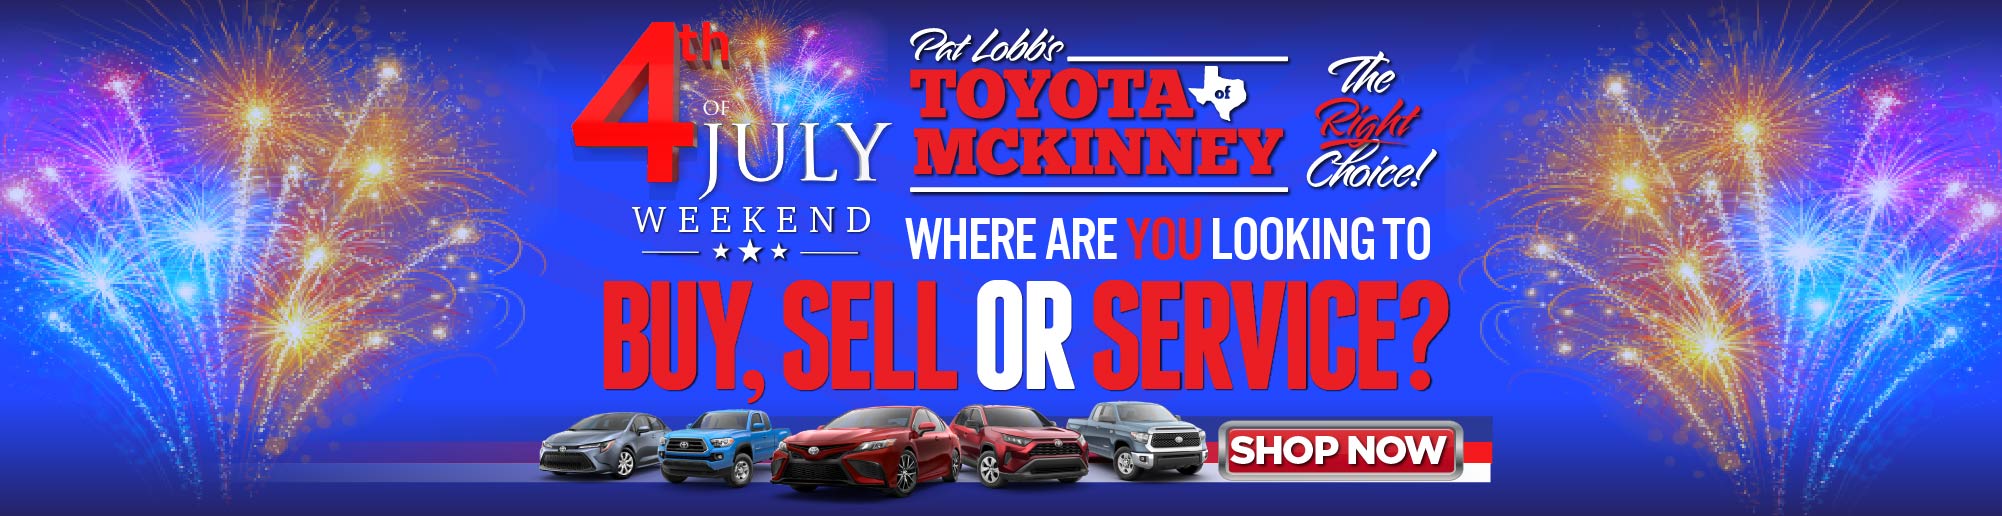 Where are you Looking to BUY SELL OR SERVICE? Toyota of McKinney is the RIGHT CHOICE!